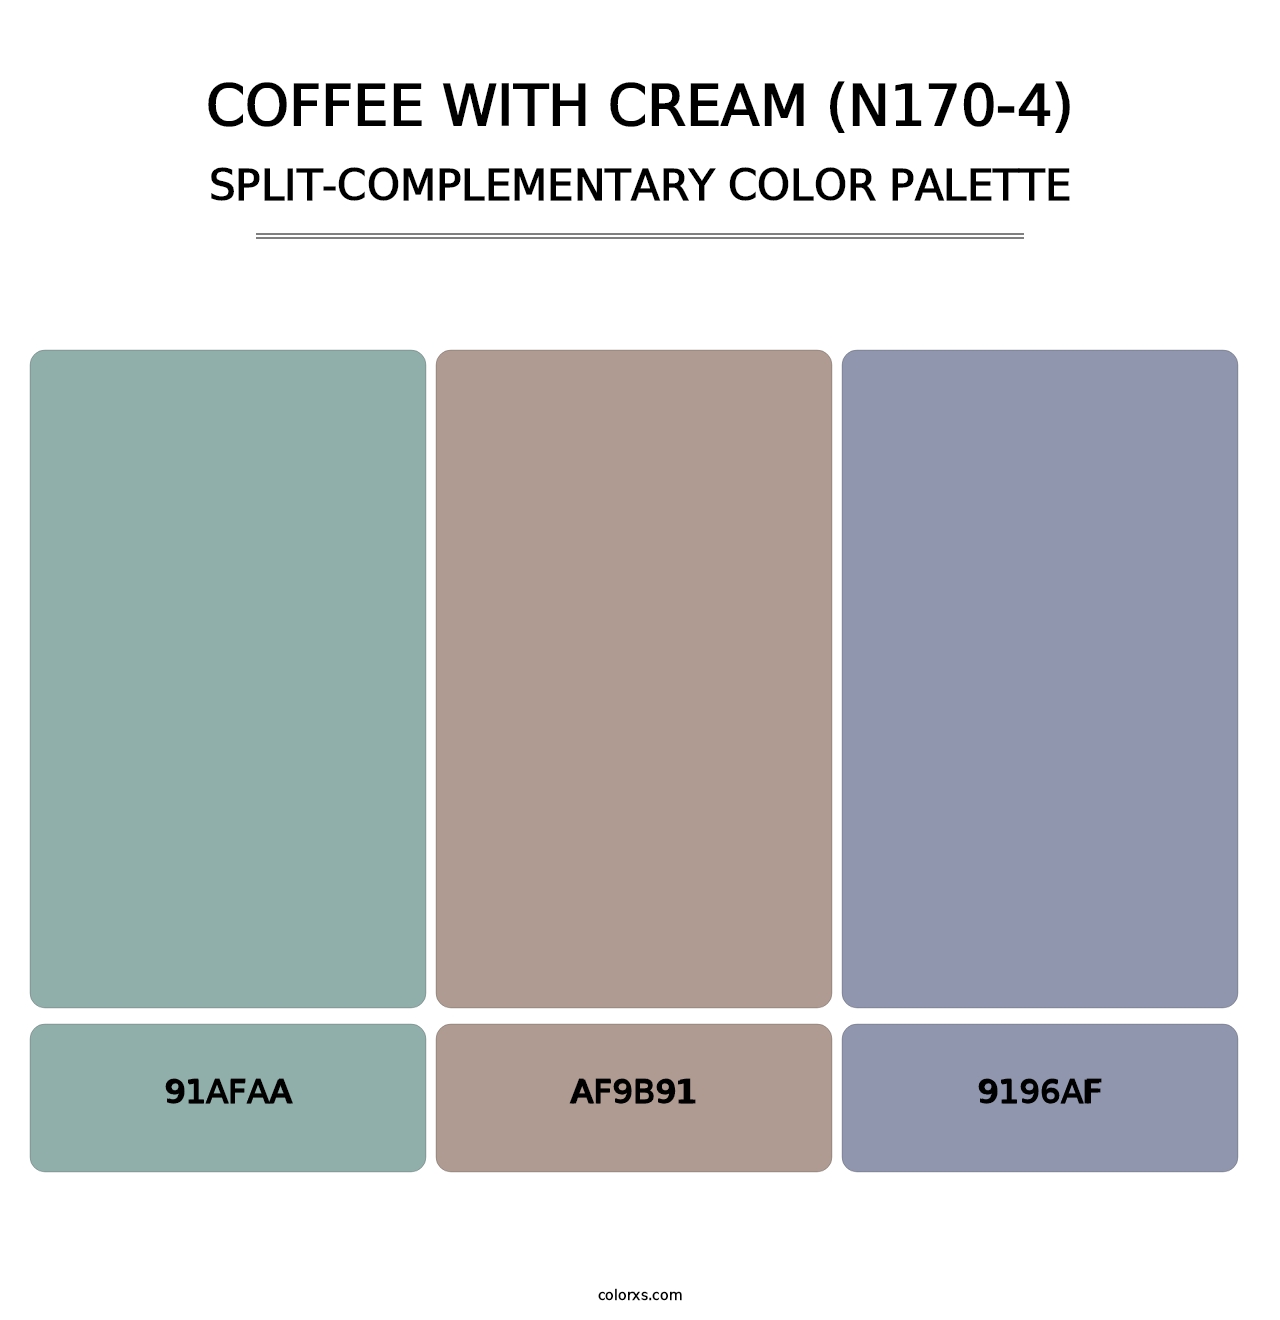 Coffee With Cream (N170-4) - Split-Complementary Color Palette